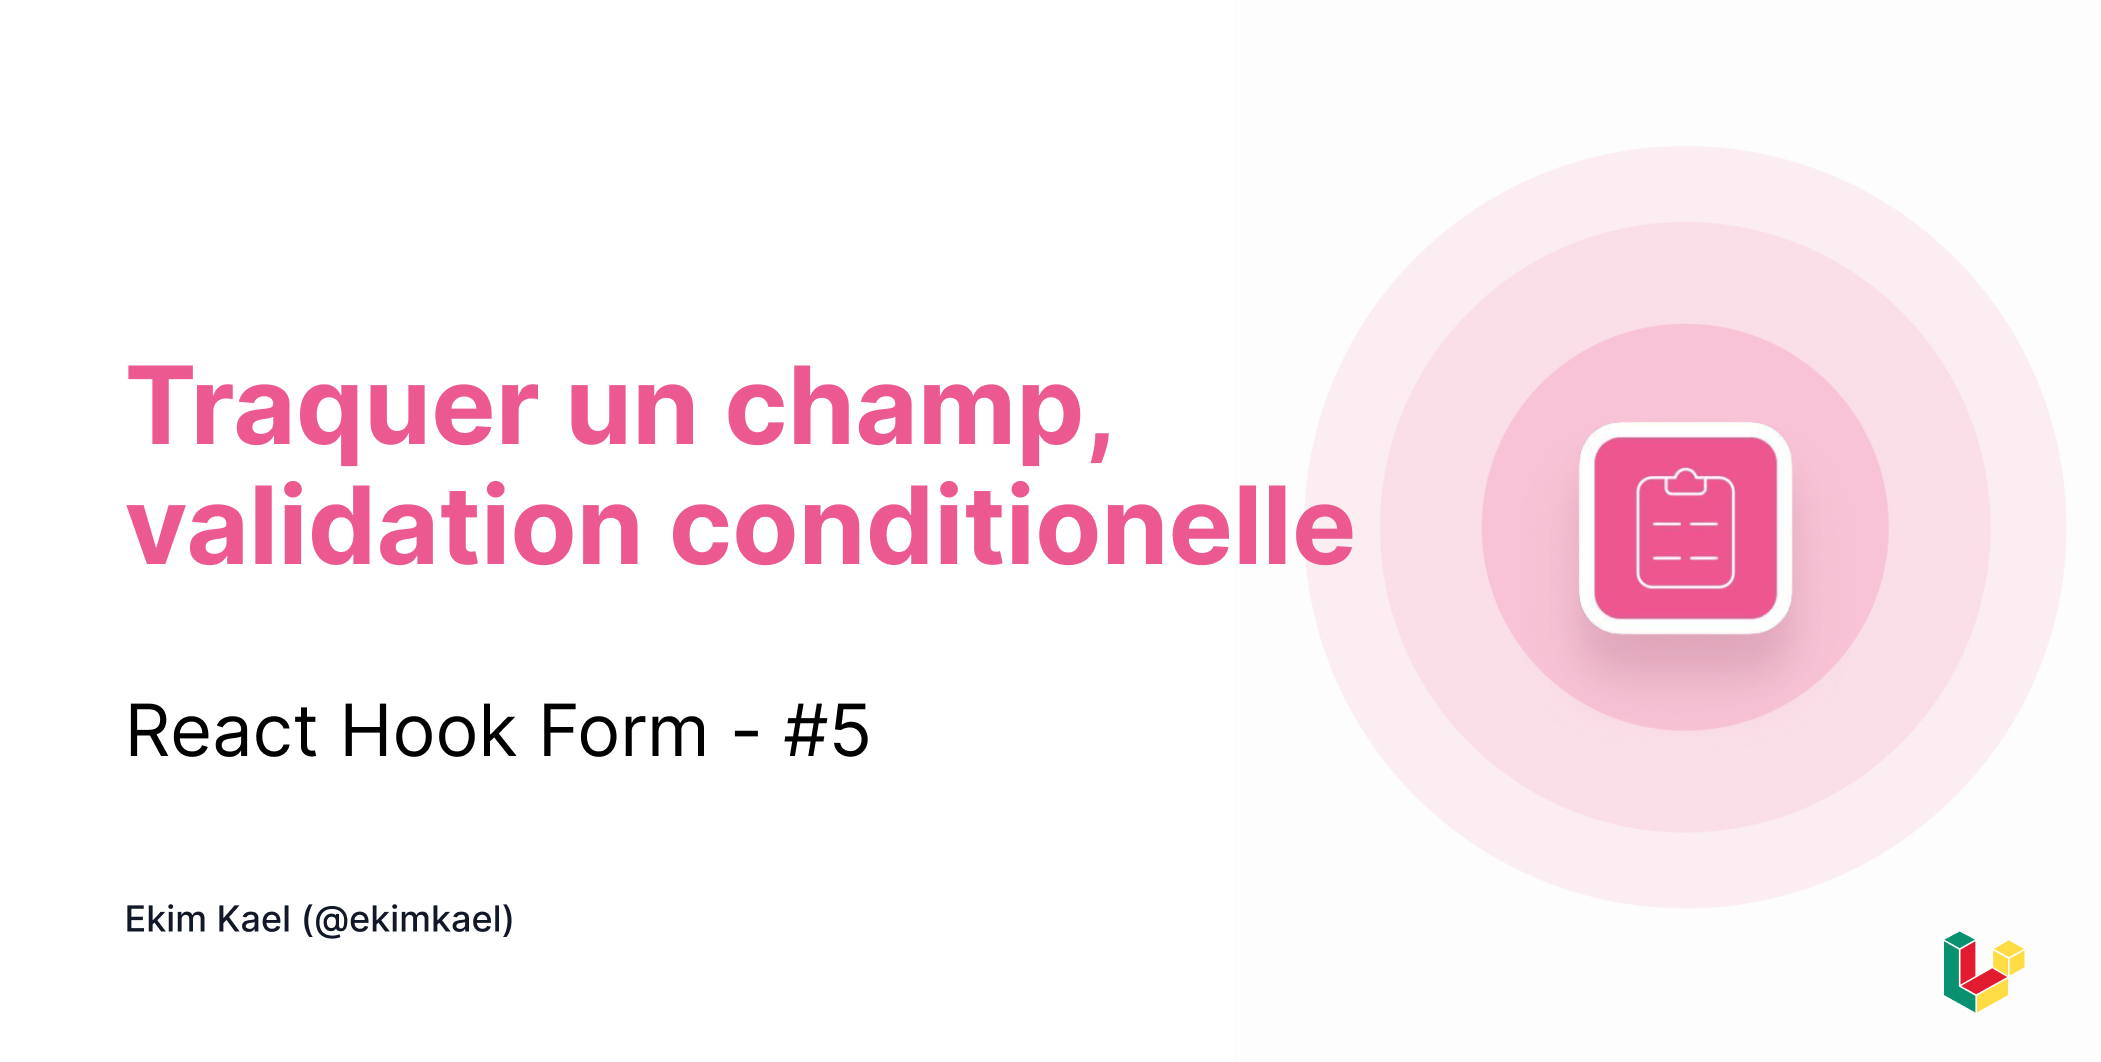 Traquer un champ, validation conditionelle - React hook Form - #5